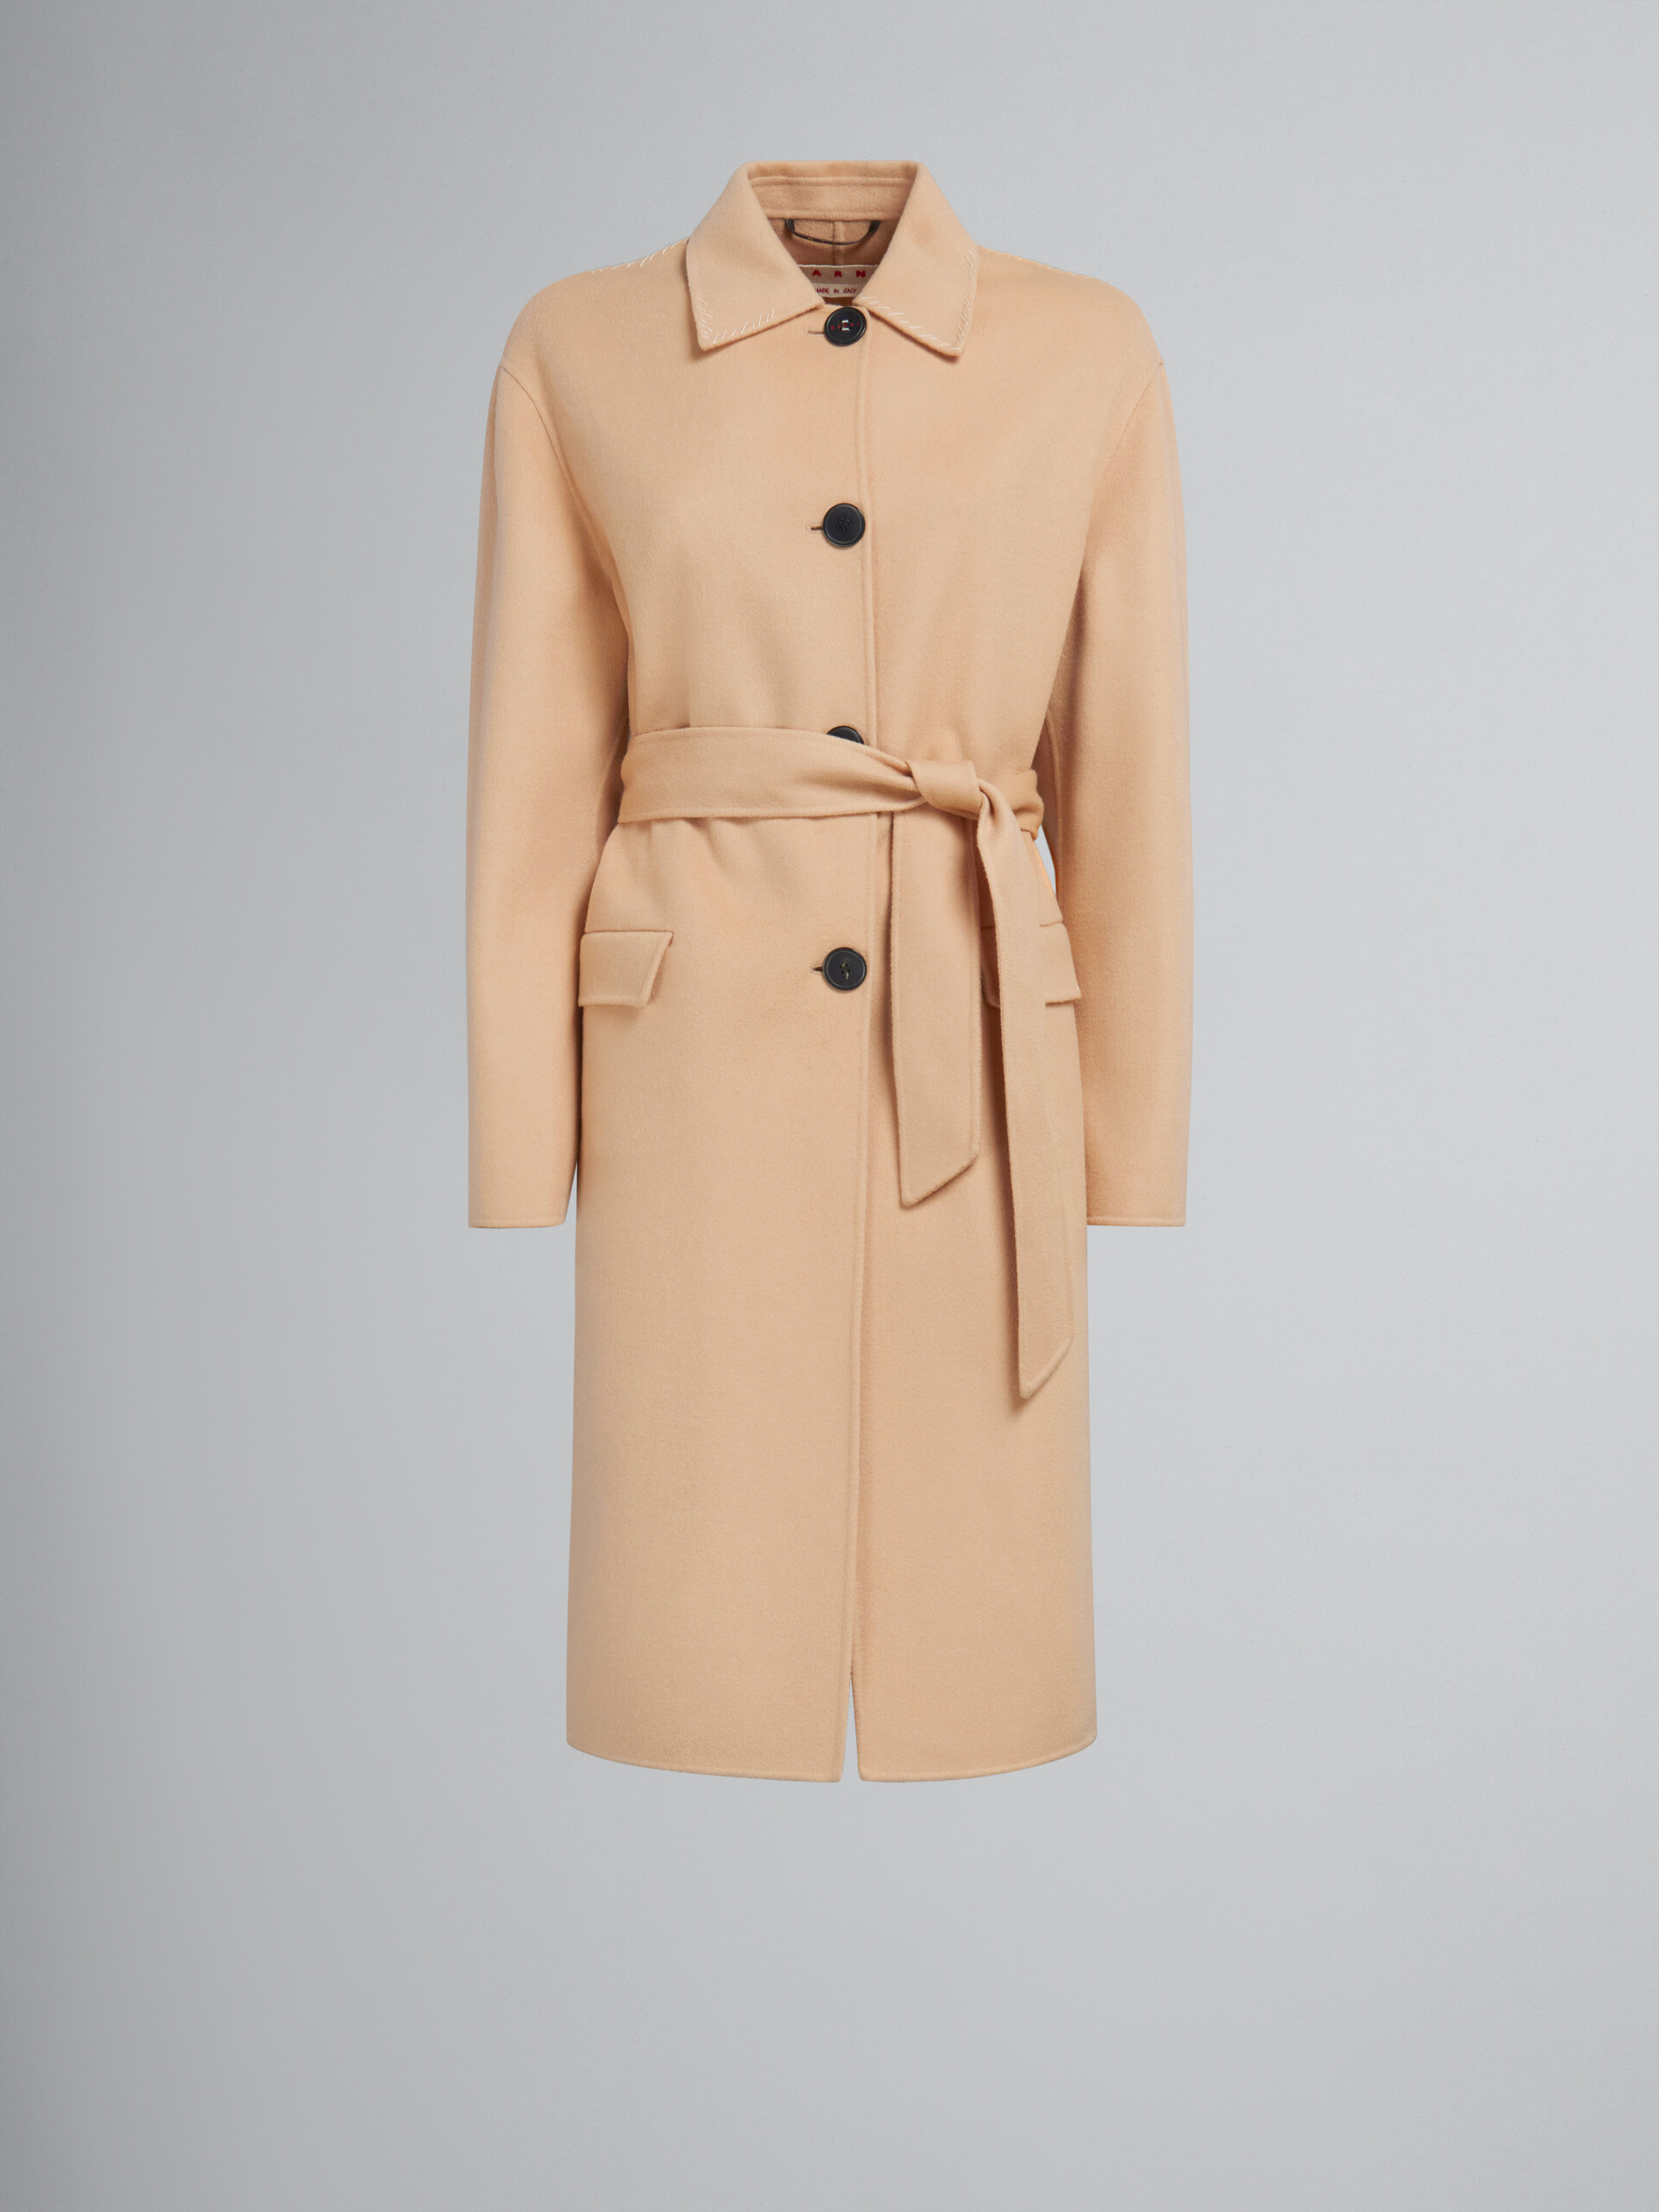 Camel wool and cashmere trench coat - Coats - Image 1